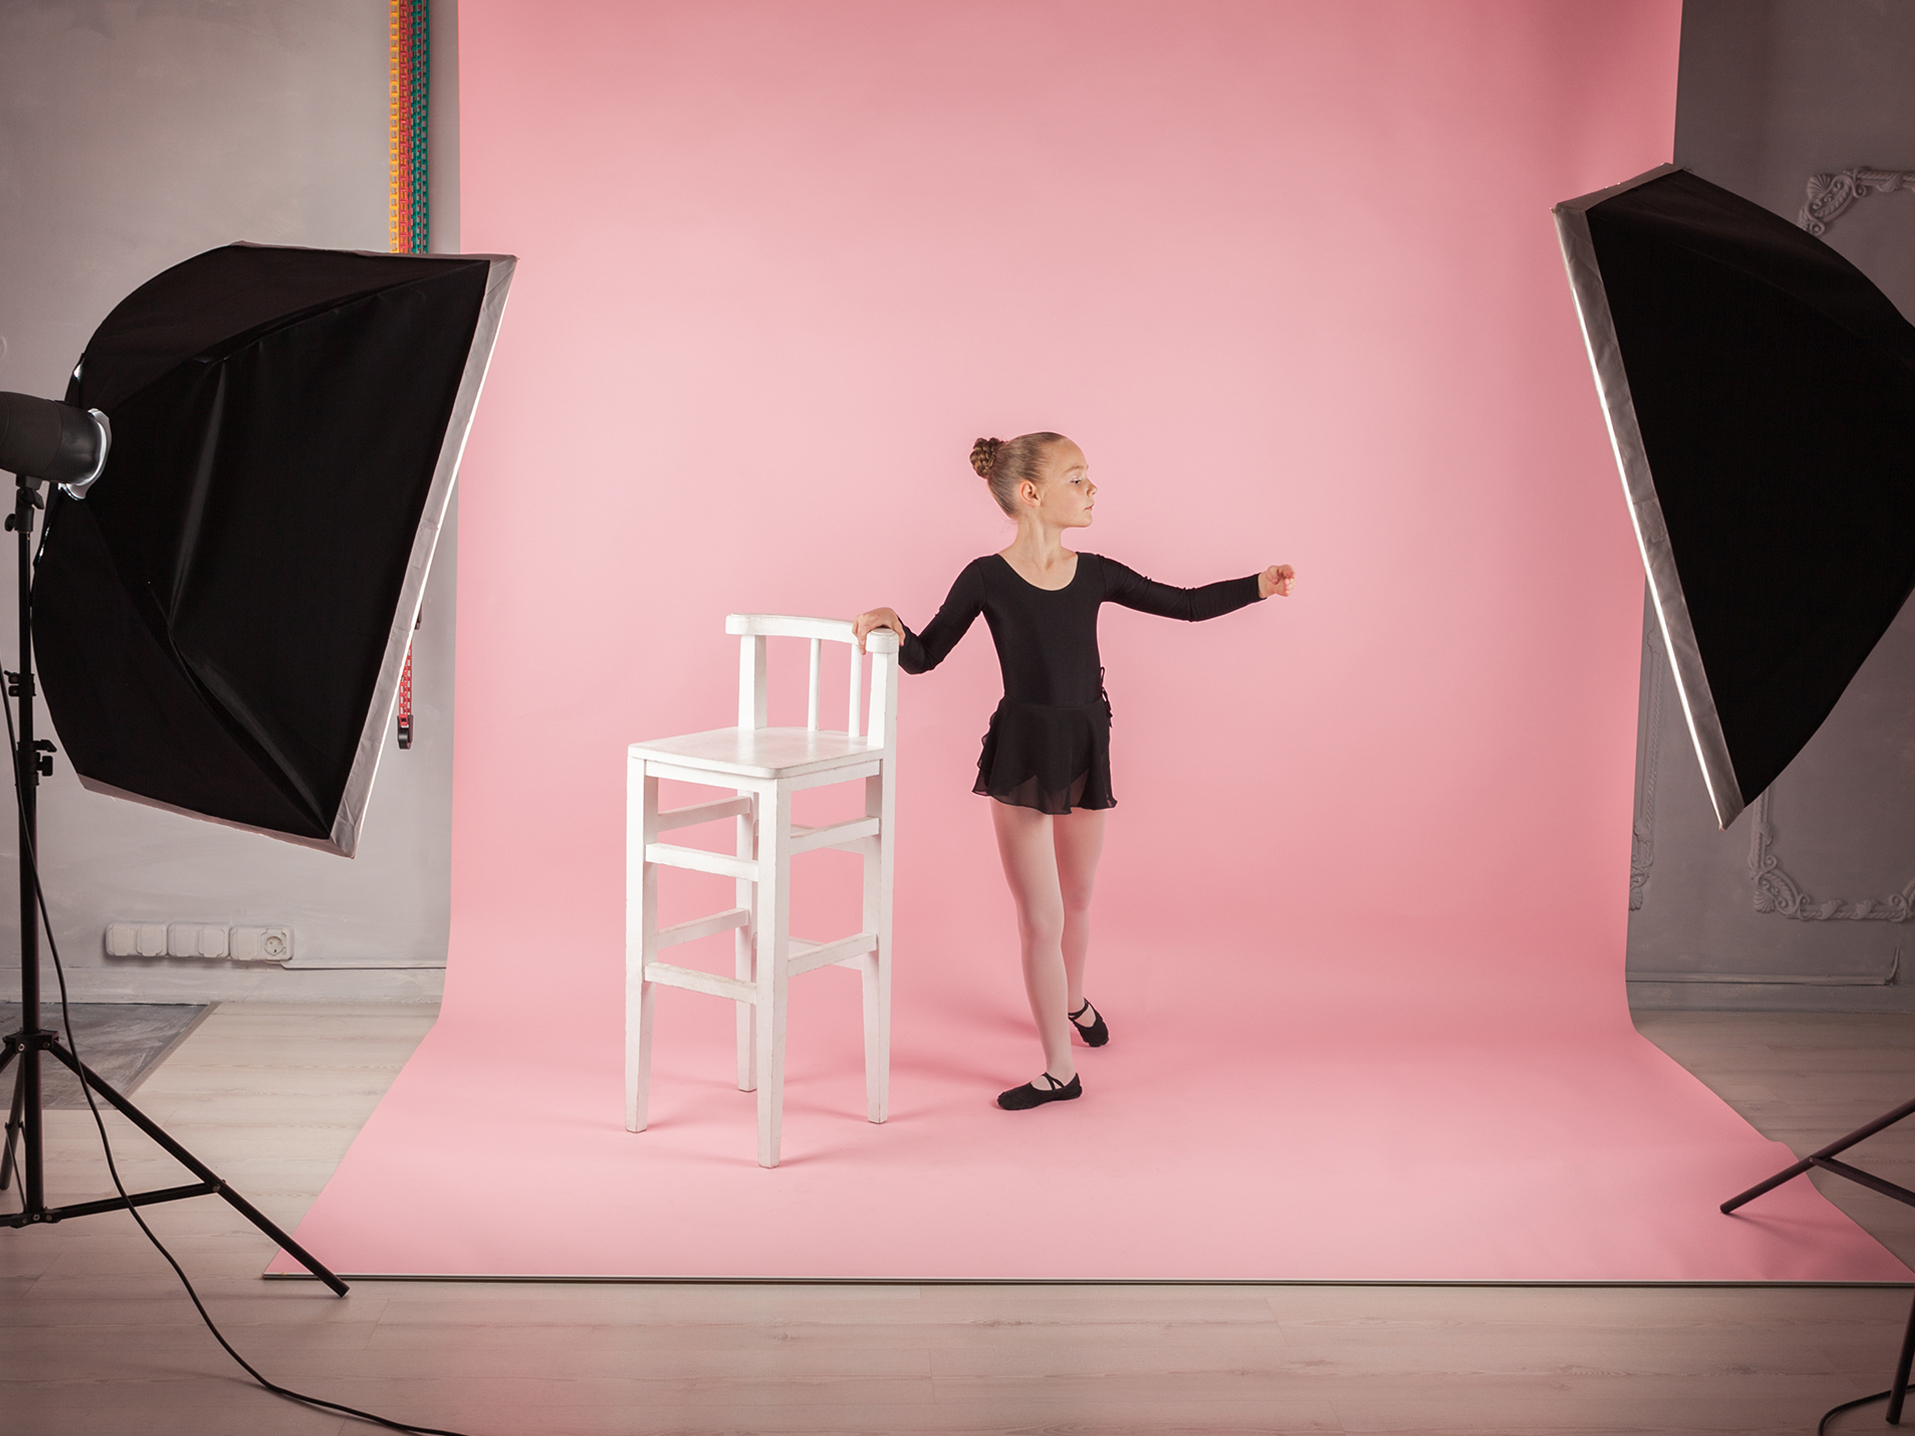 Professional Studio Photography setup with a young dancer on a pink sweep background posing for a photoshoot